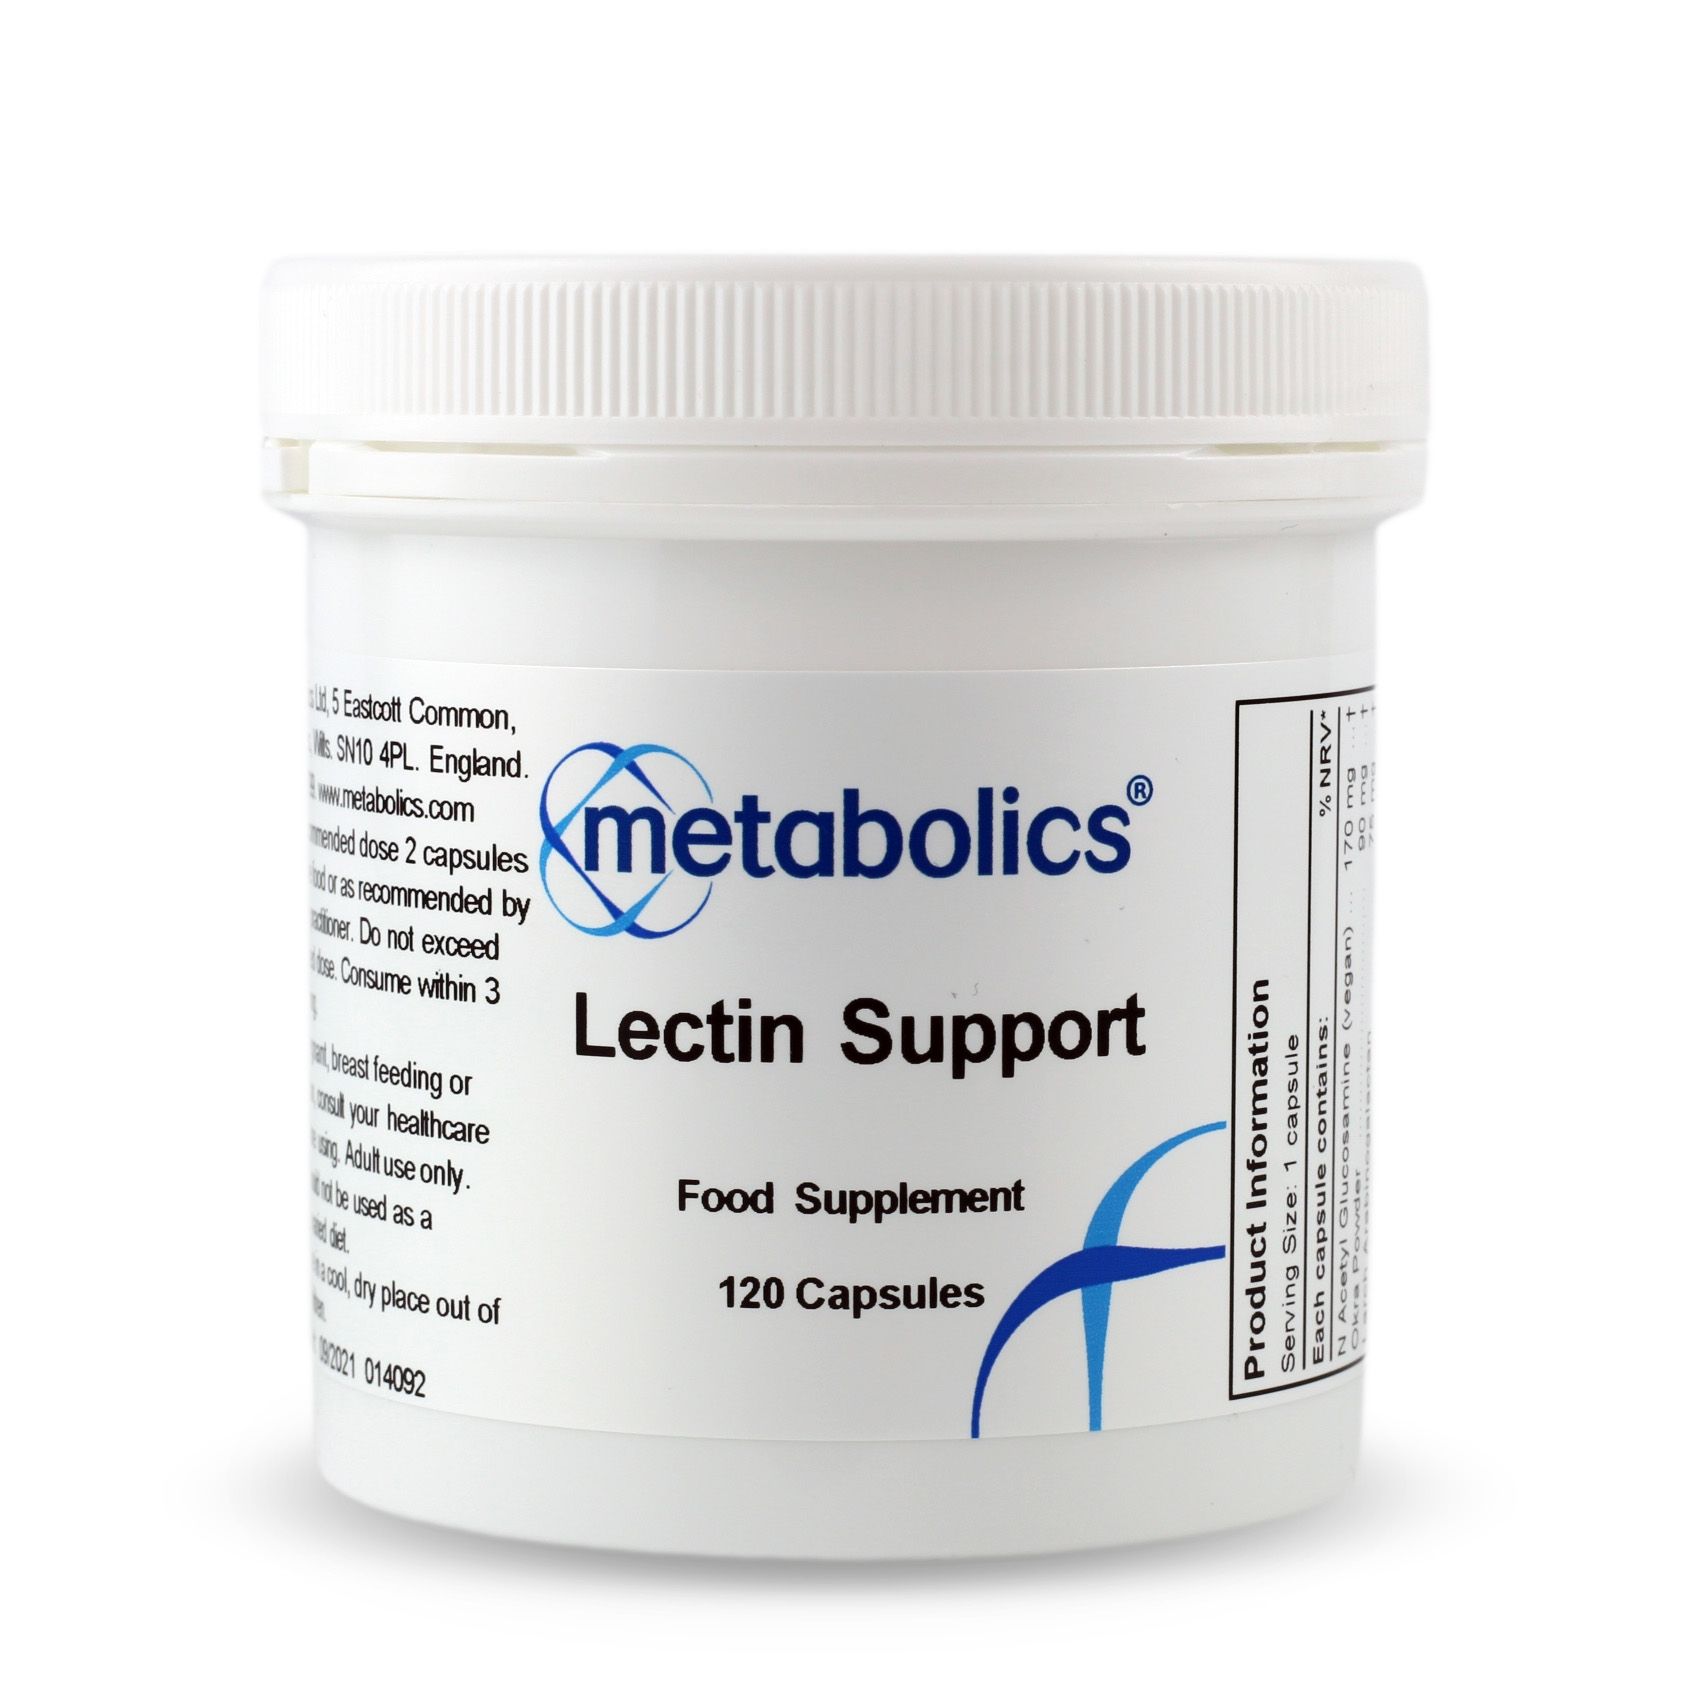 Lectin Support